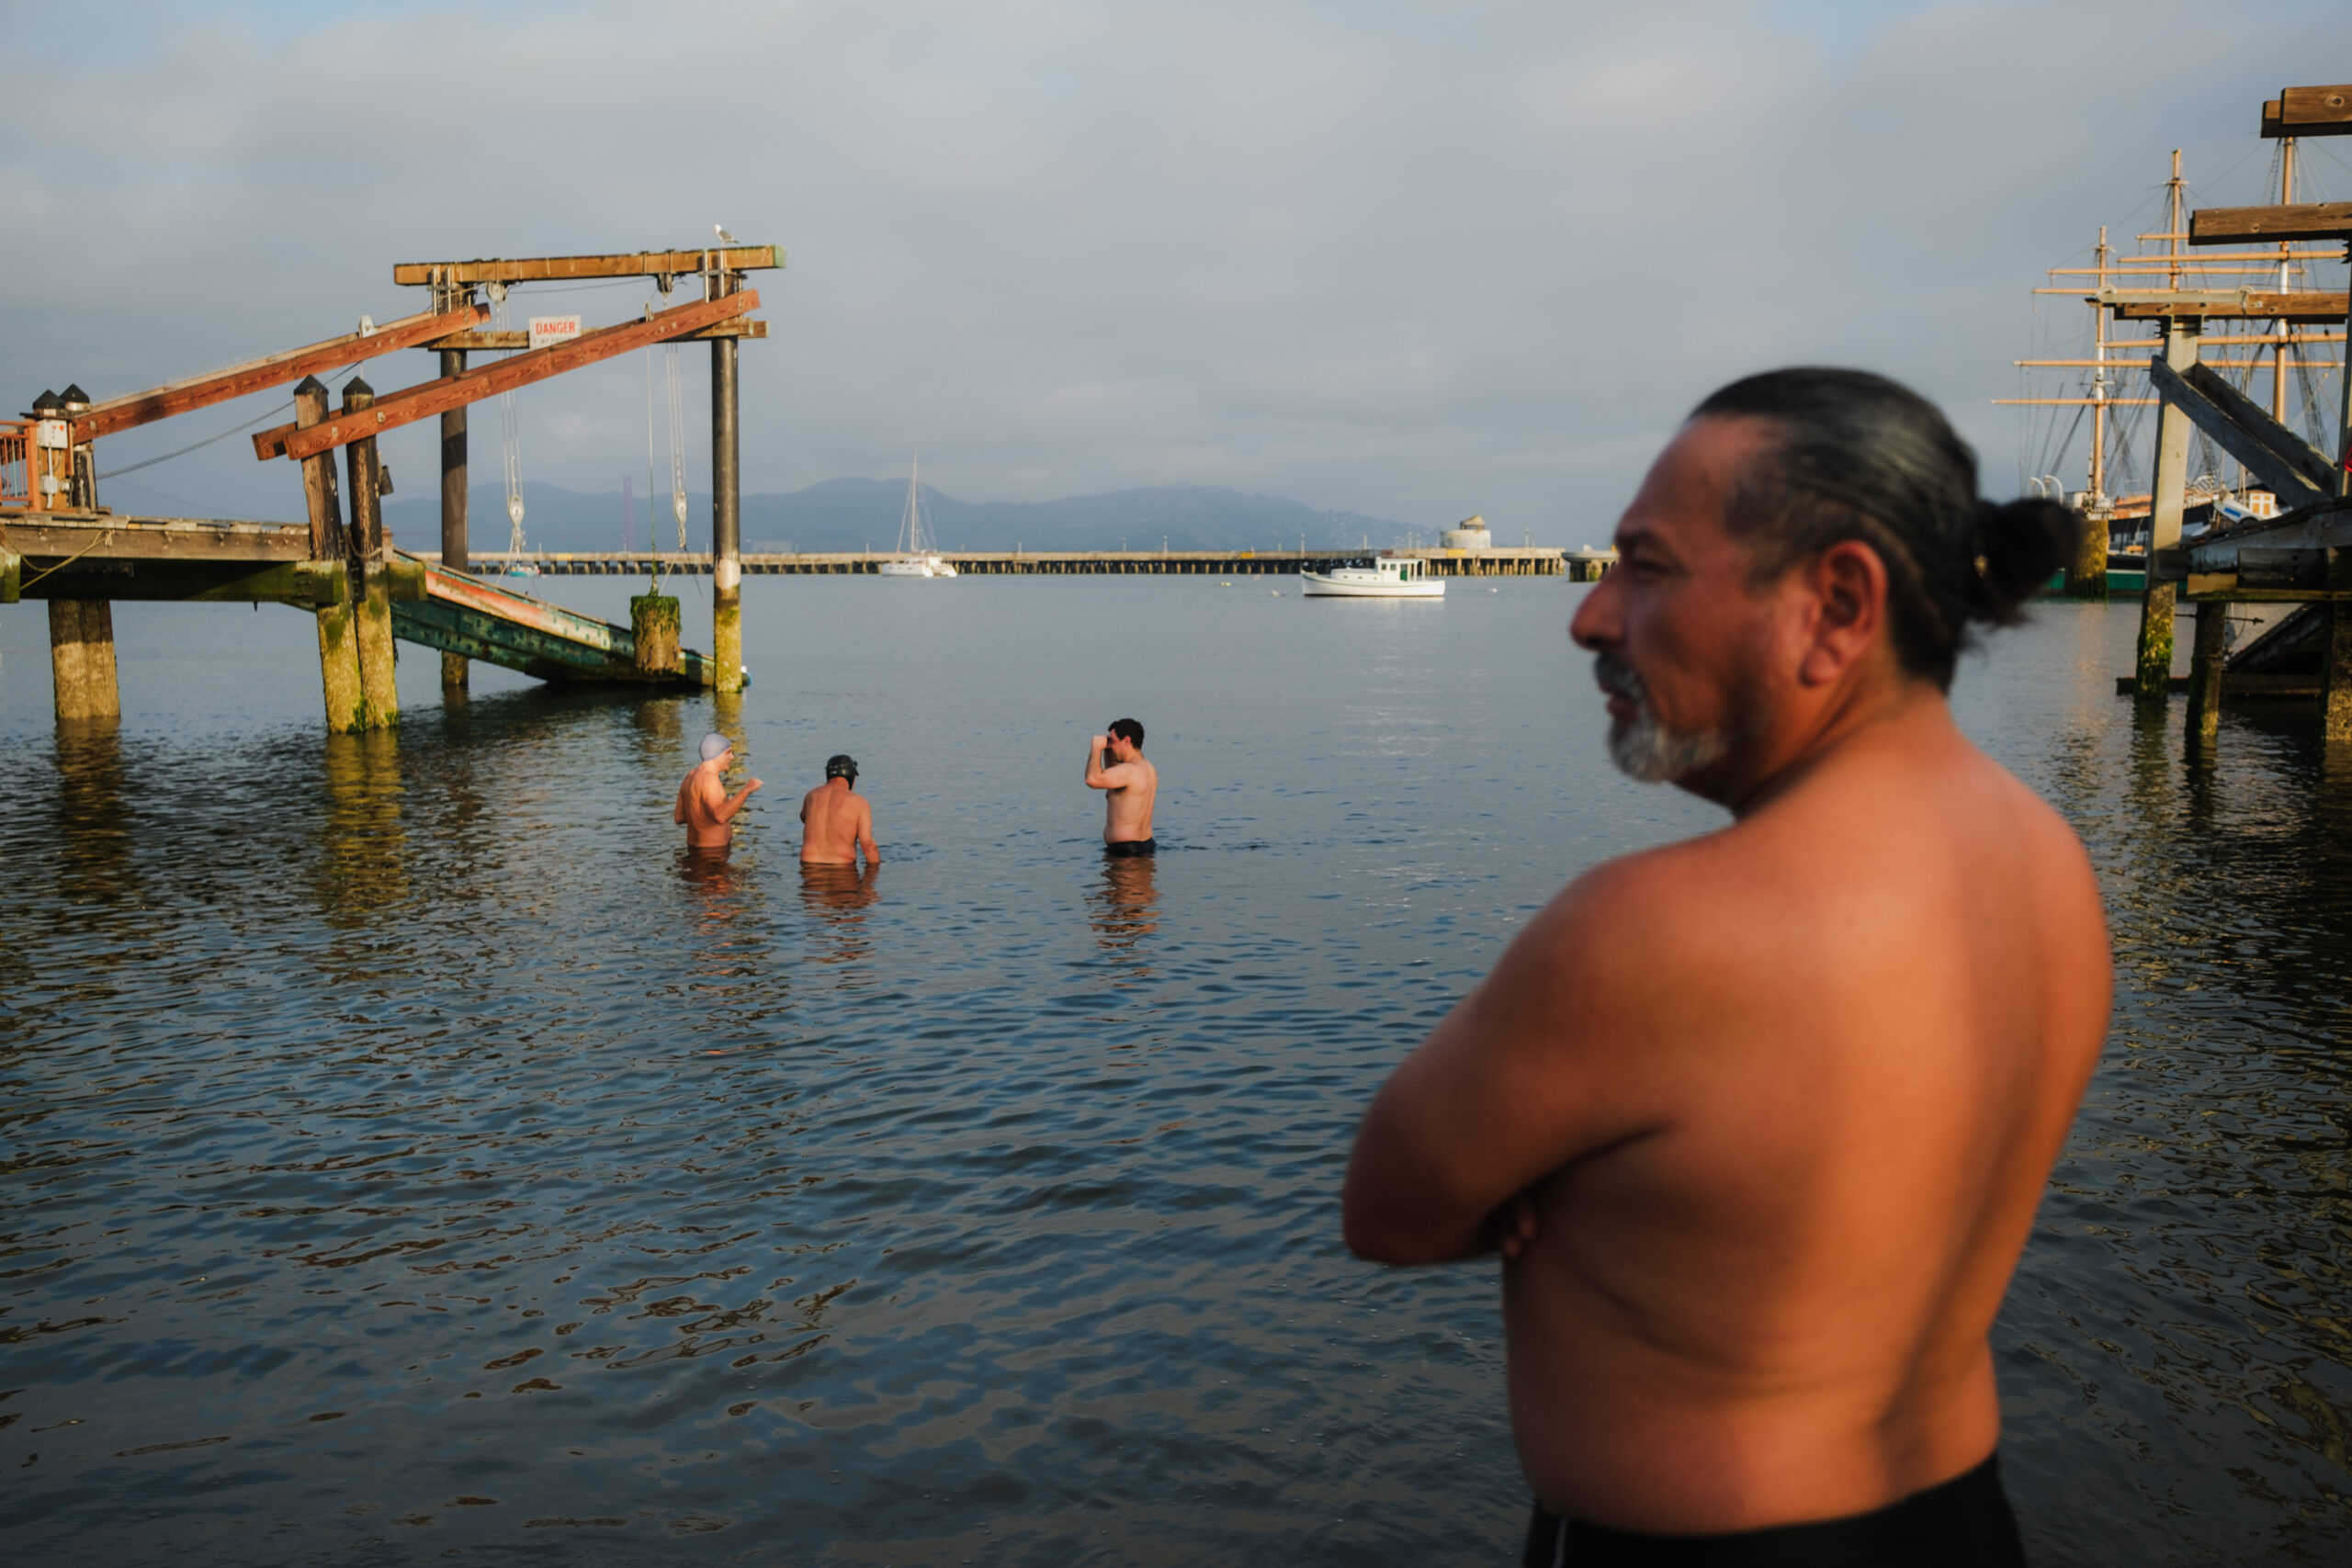 ‘We Don’t Care’: Algae Won’t Stop These Hardcore San Francisco Swimmers From Dips in The Bay